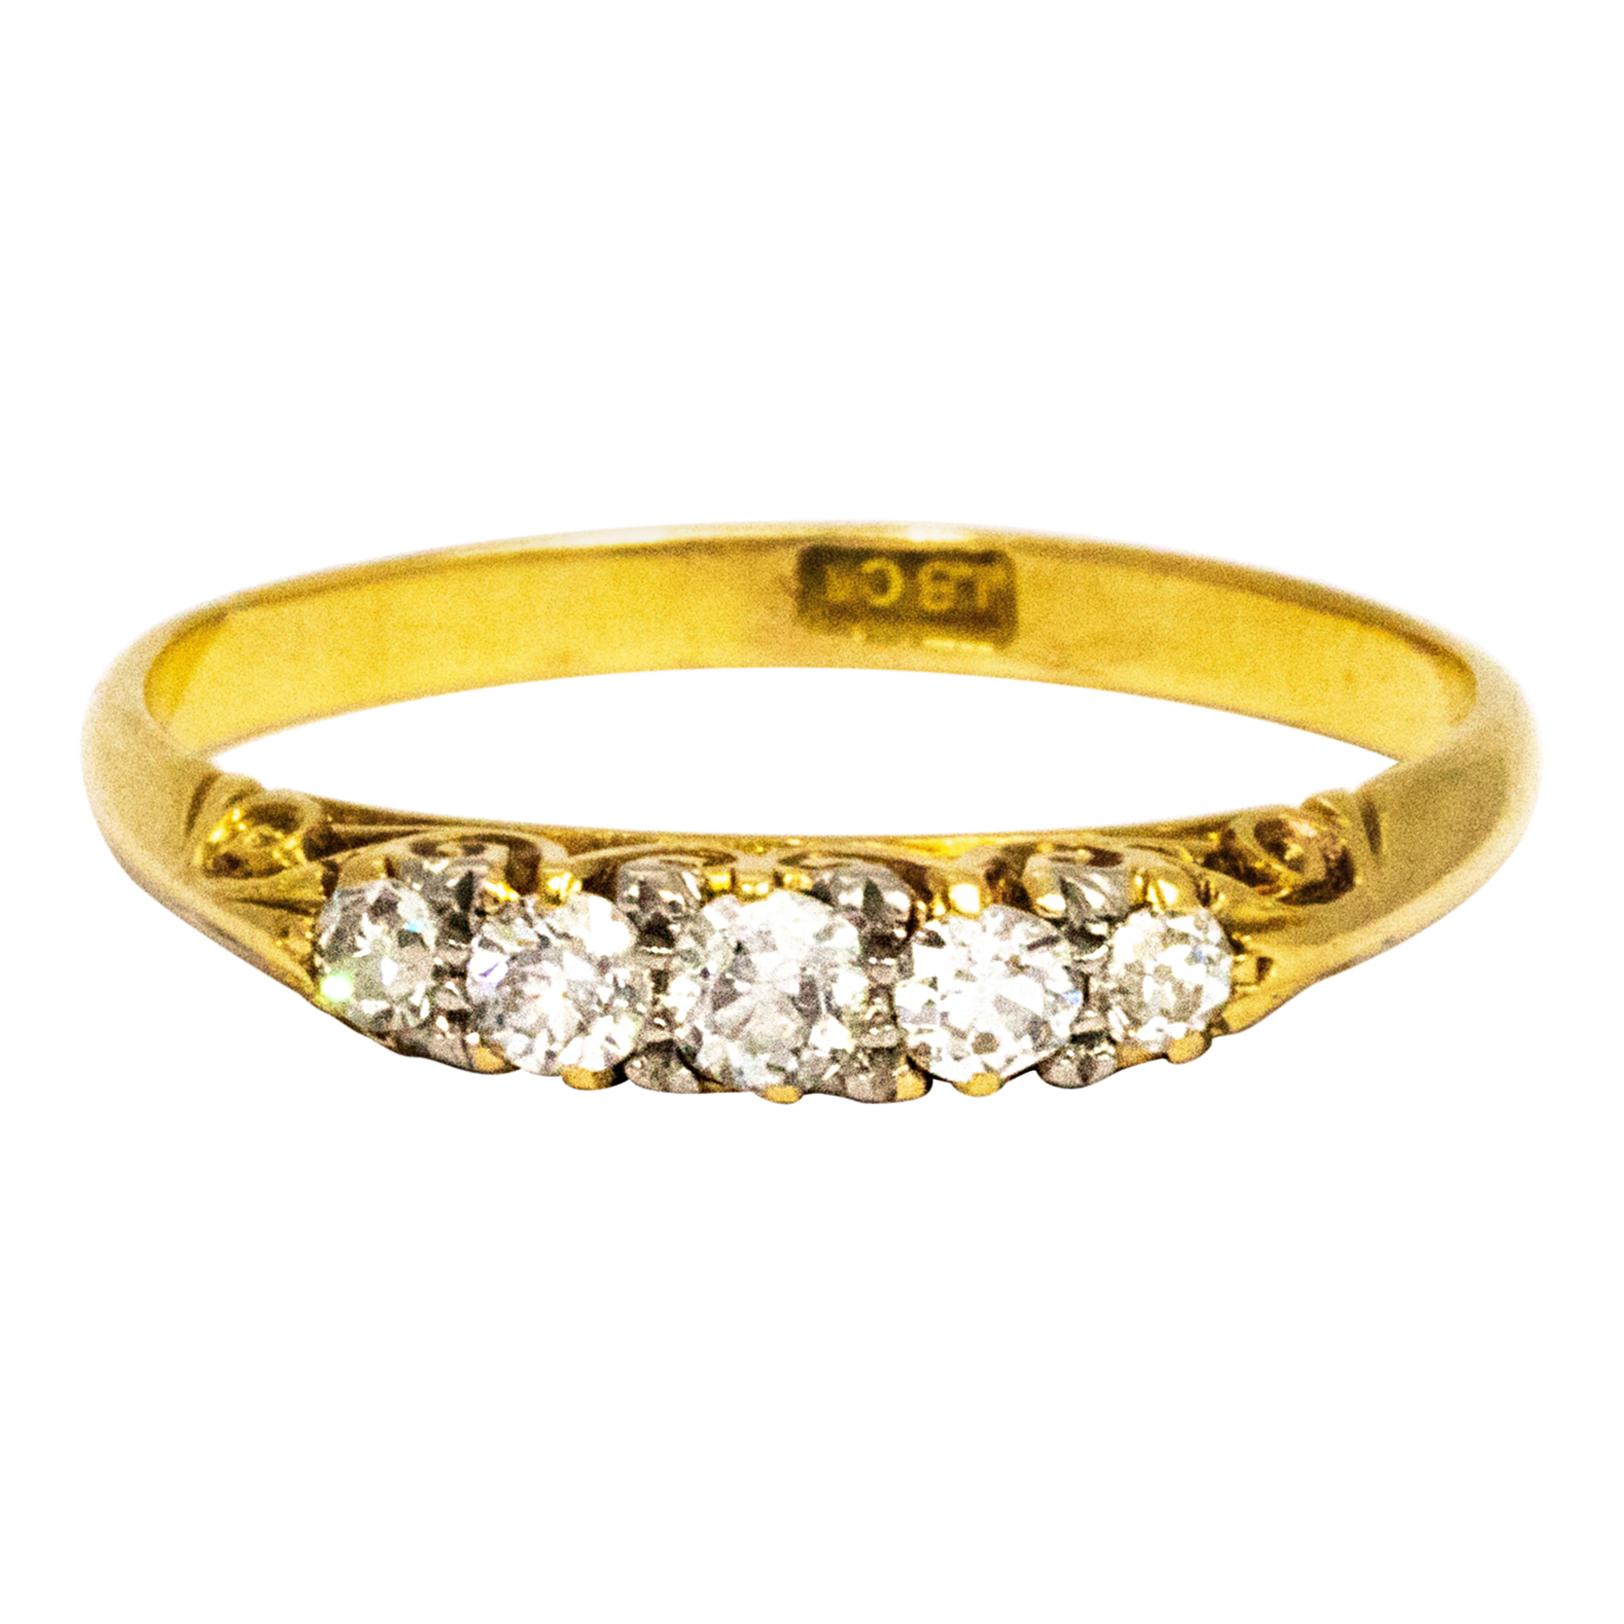 Victorian Diamond and 18 Carat Gold Five-Stone Ring